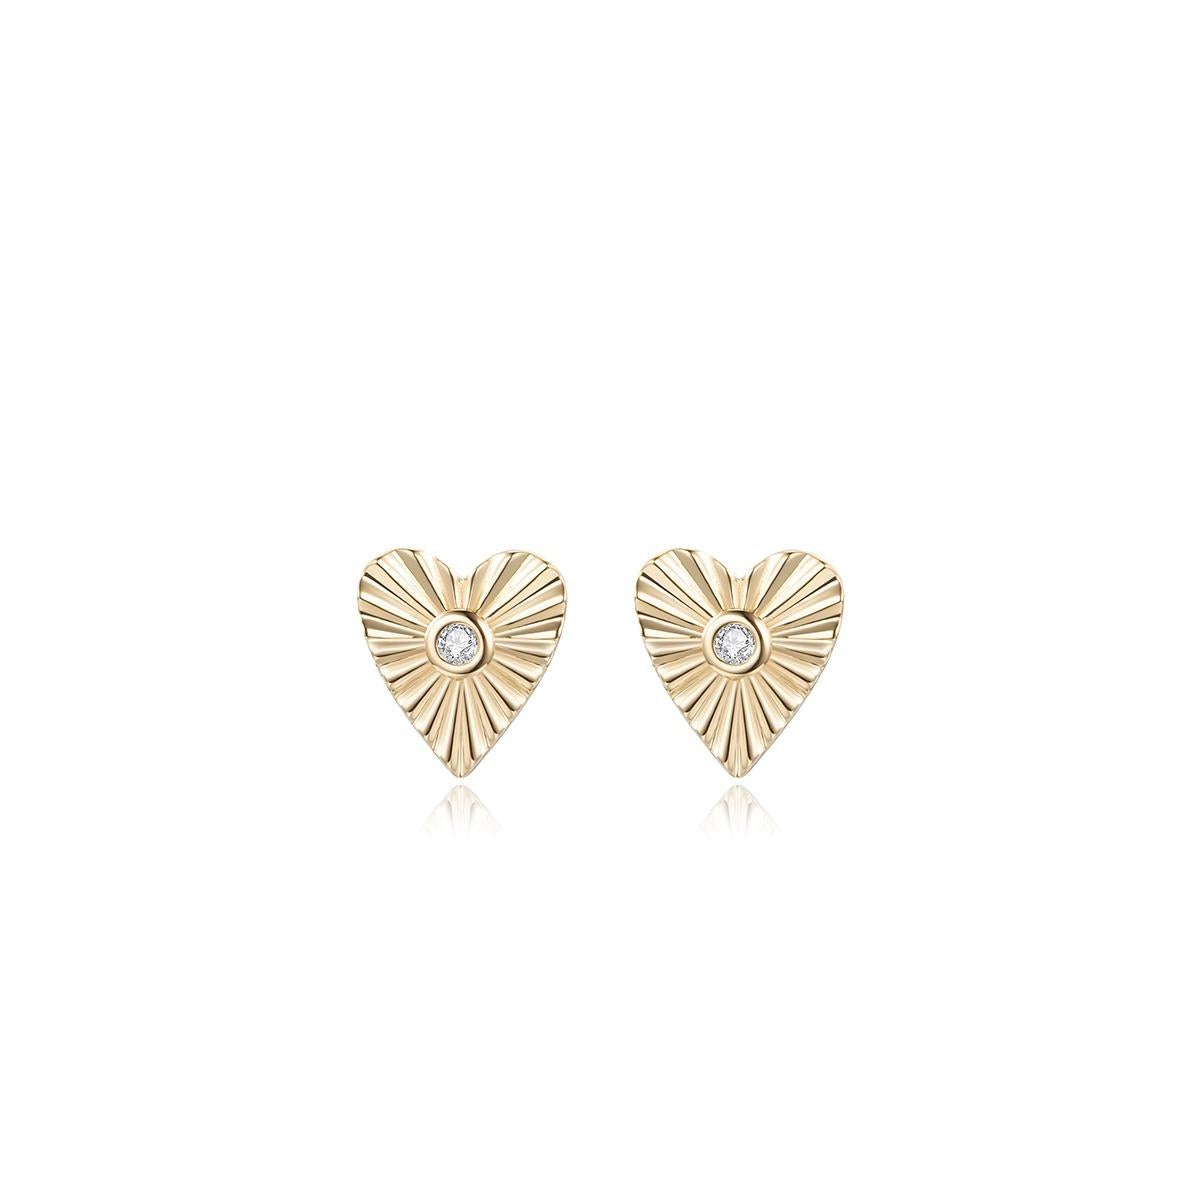 Earring Information
Diamond Type : Natural Diamond
Metal : 14k
Metal Color : Yellow Gold
Diamond Shape : Round Diamond
Diamond Carat Weight : 0.03ttcw
Diamond Color-Clarity : G-SI
Size	: 9.5mm*8.5mm


JEWELRY CARE
Over the course of time, body oil